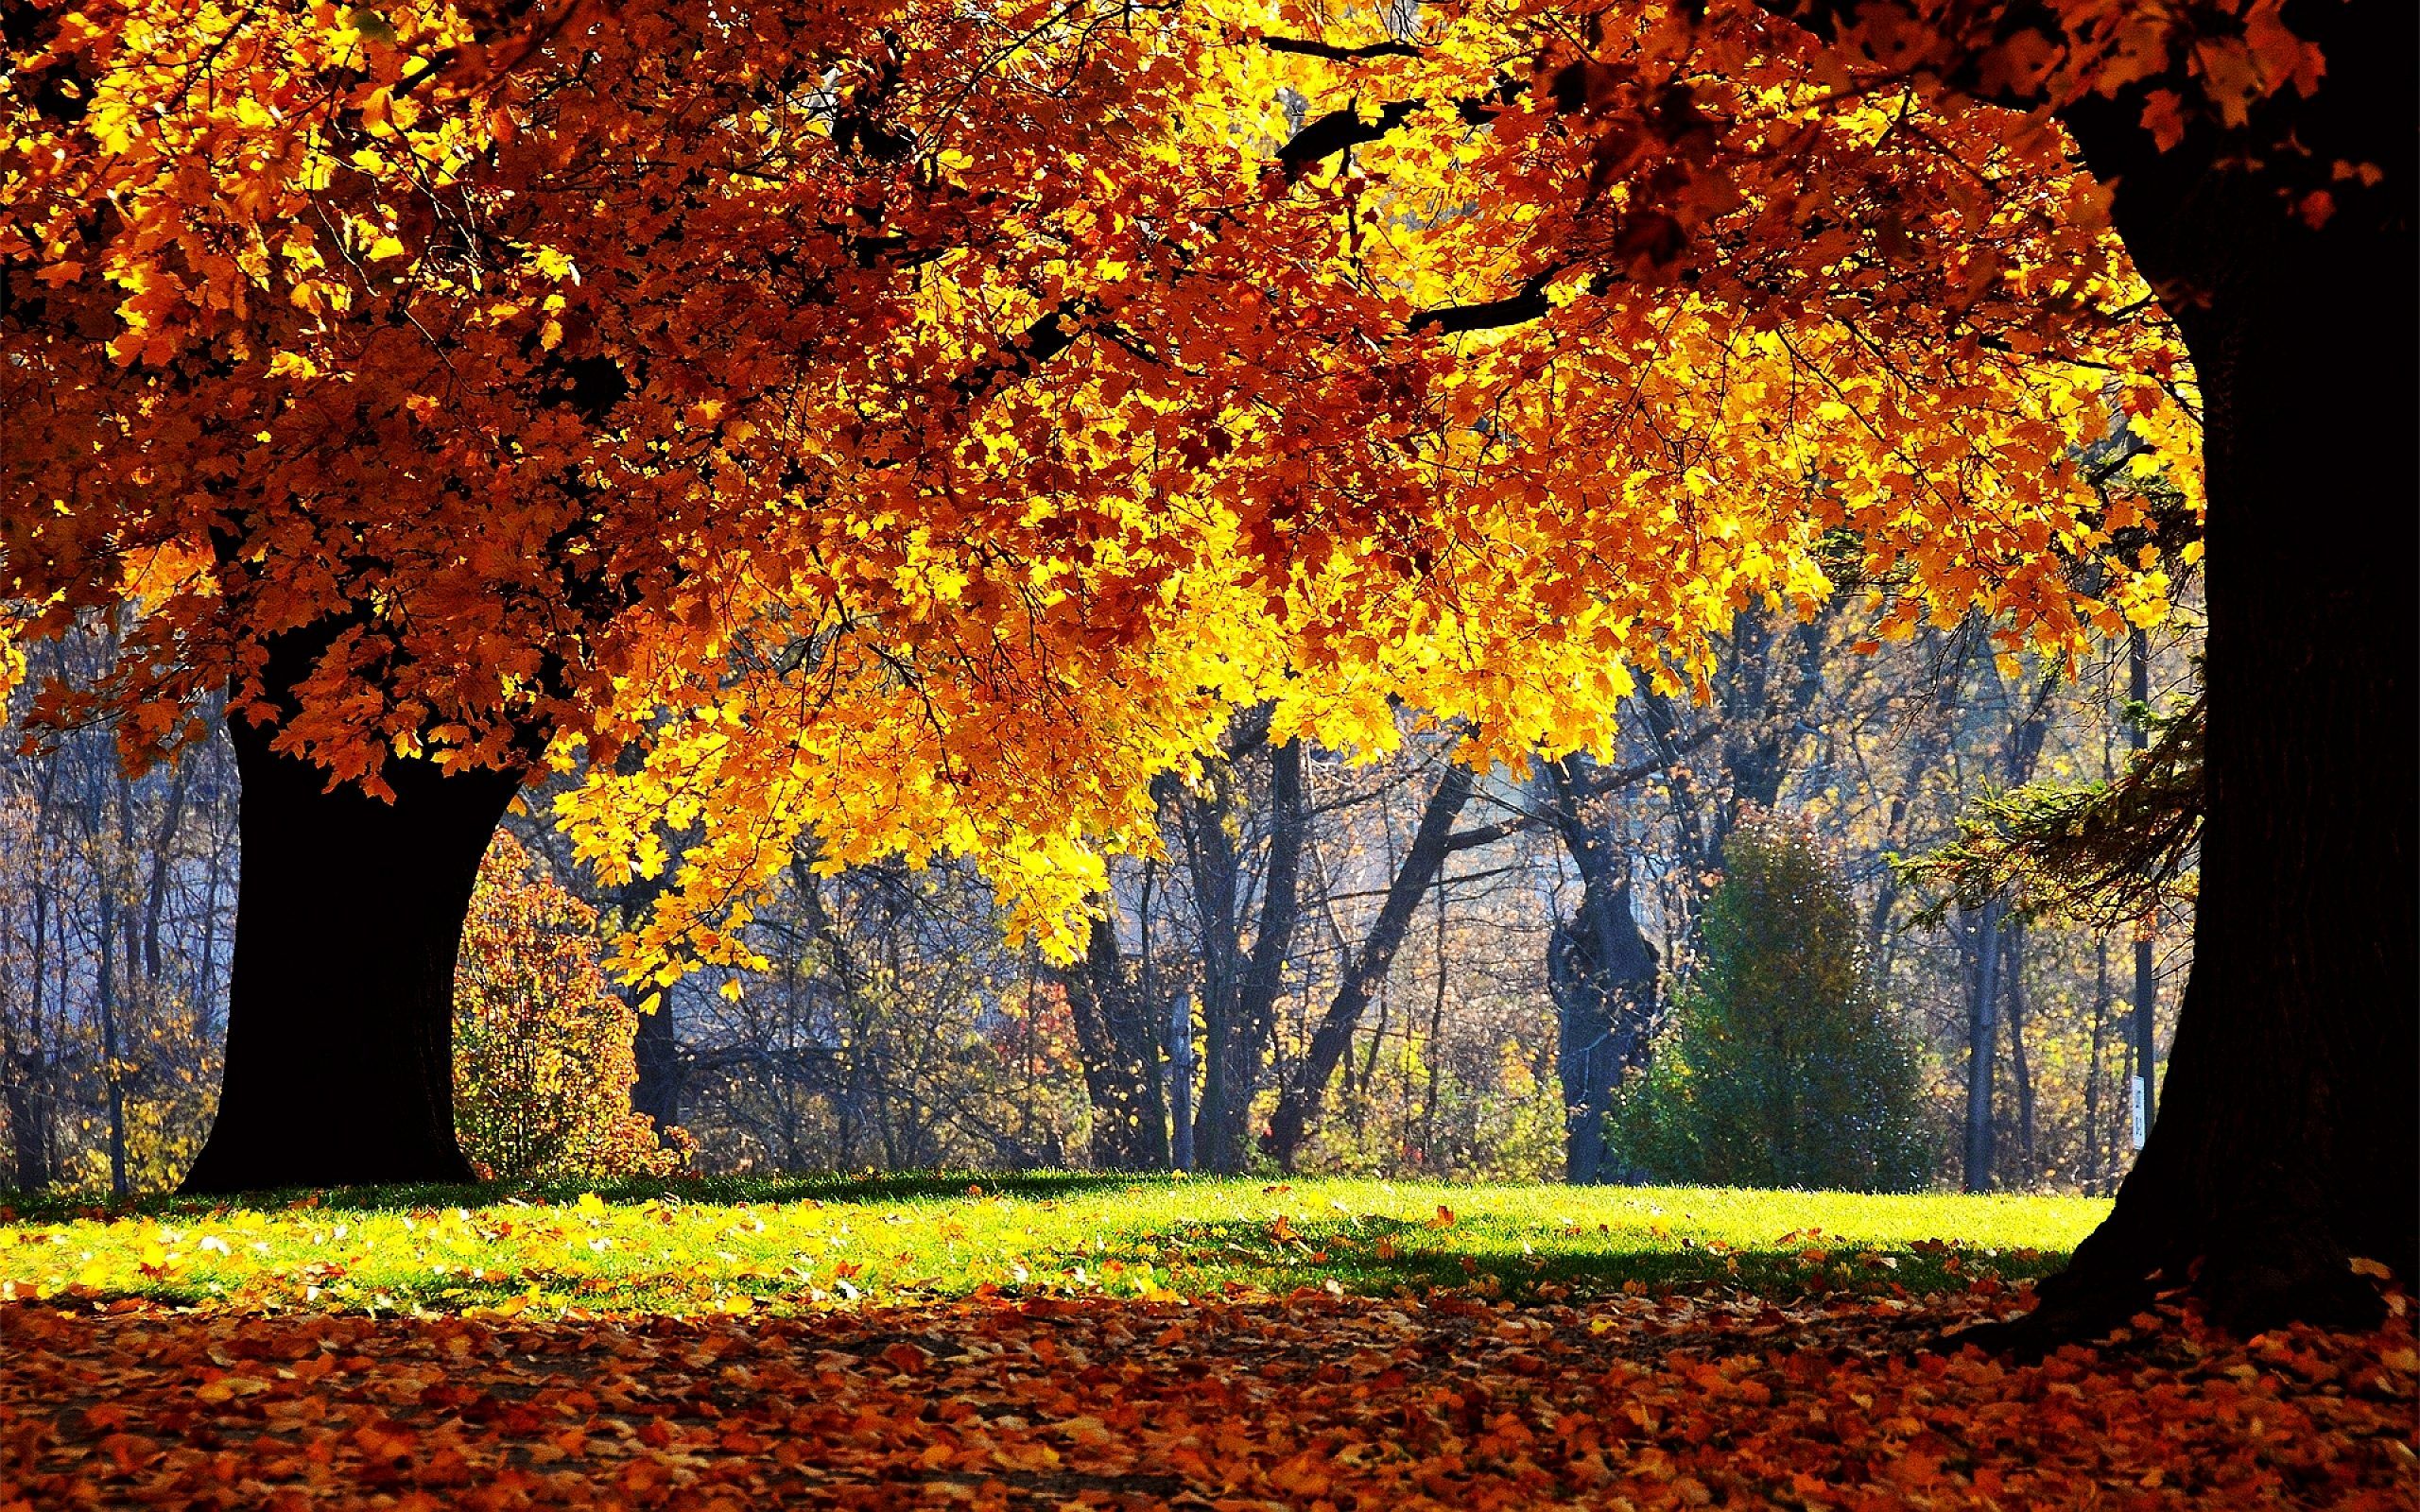 Research suggests autumn is ending later in the northern hemisphere (Constantine Alexander's Journal)